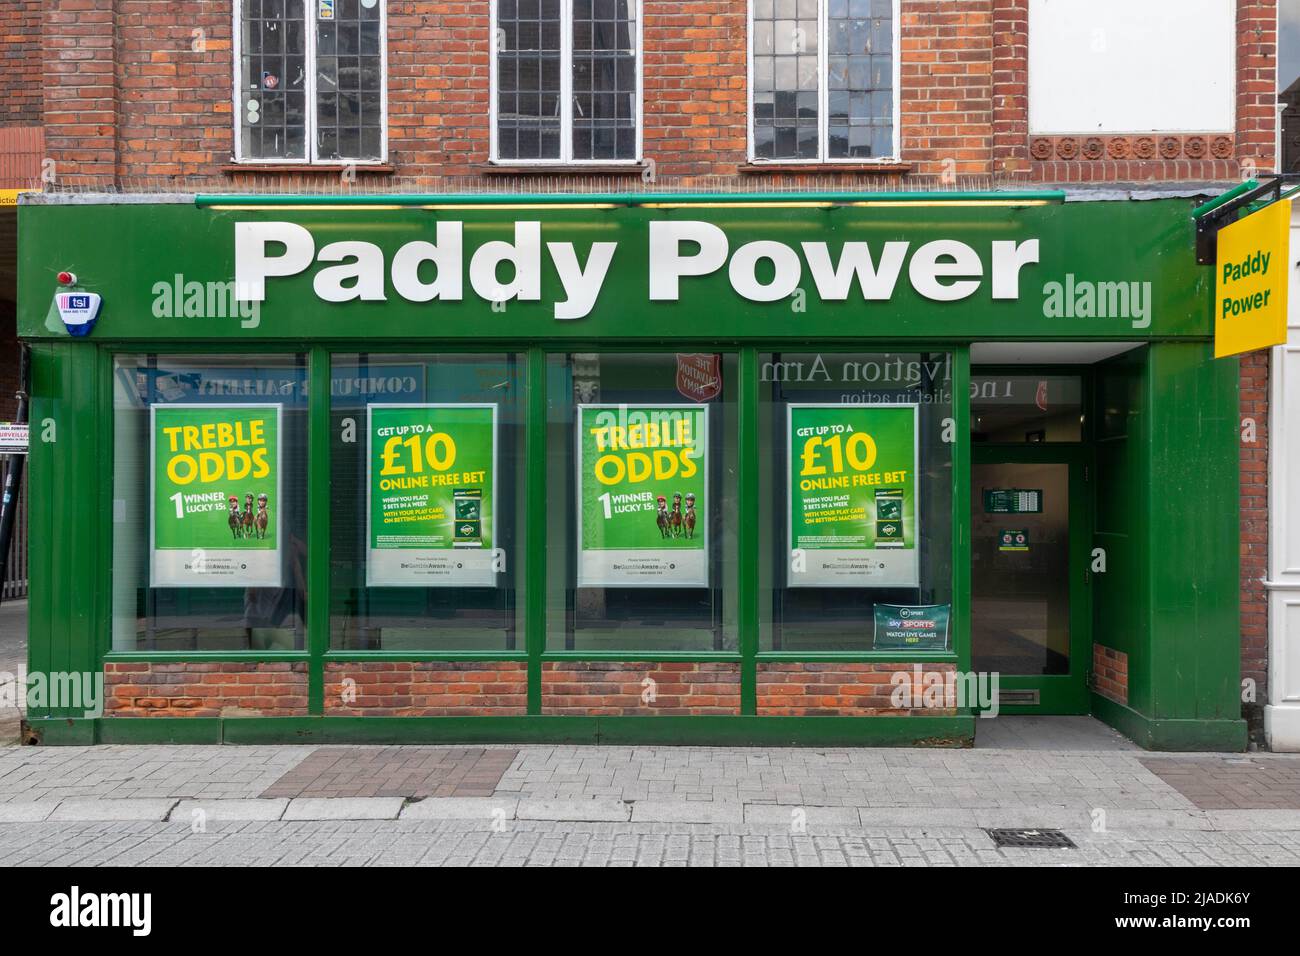 High Wycombe, England - July 21st 2021: Paddy Power betting shop on the High Street, The Irish chain was founded in 1988. Stock Photo